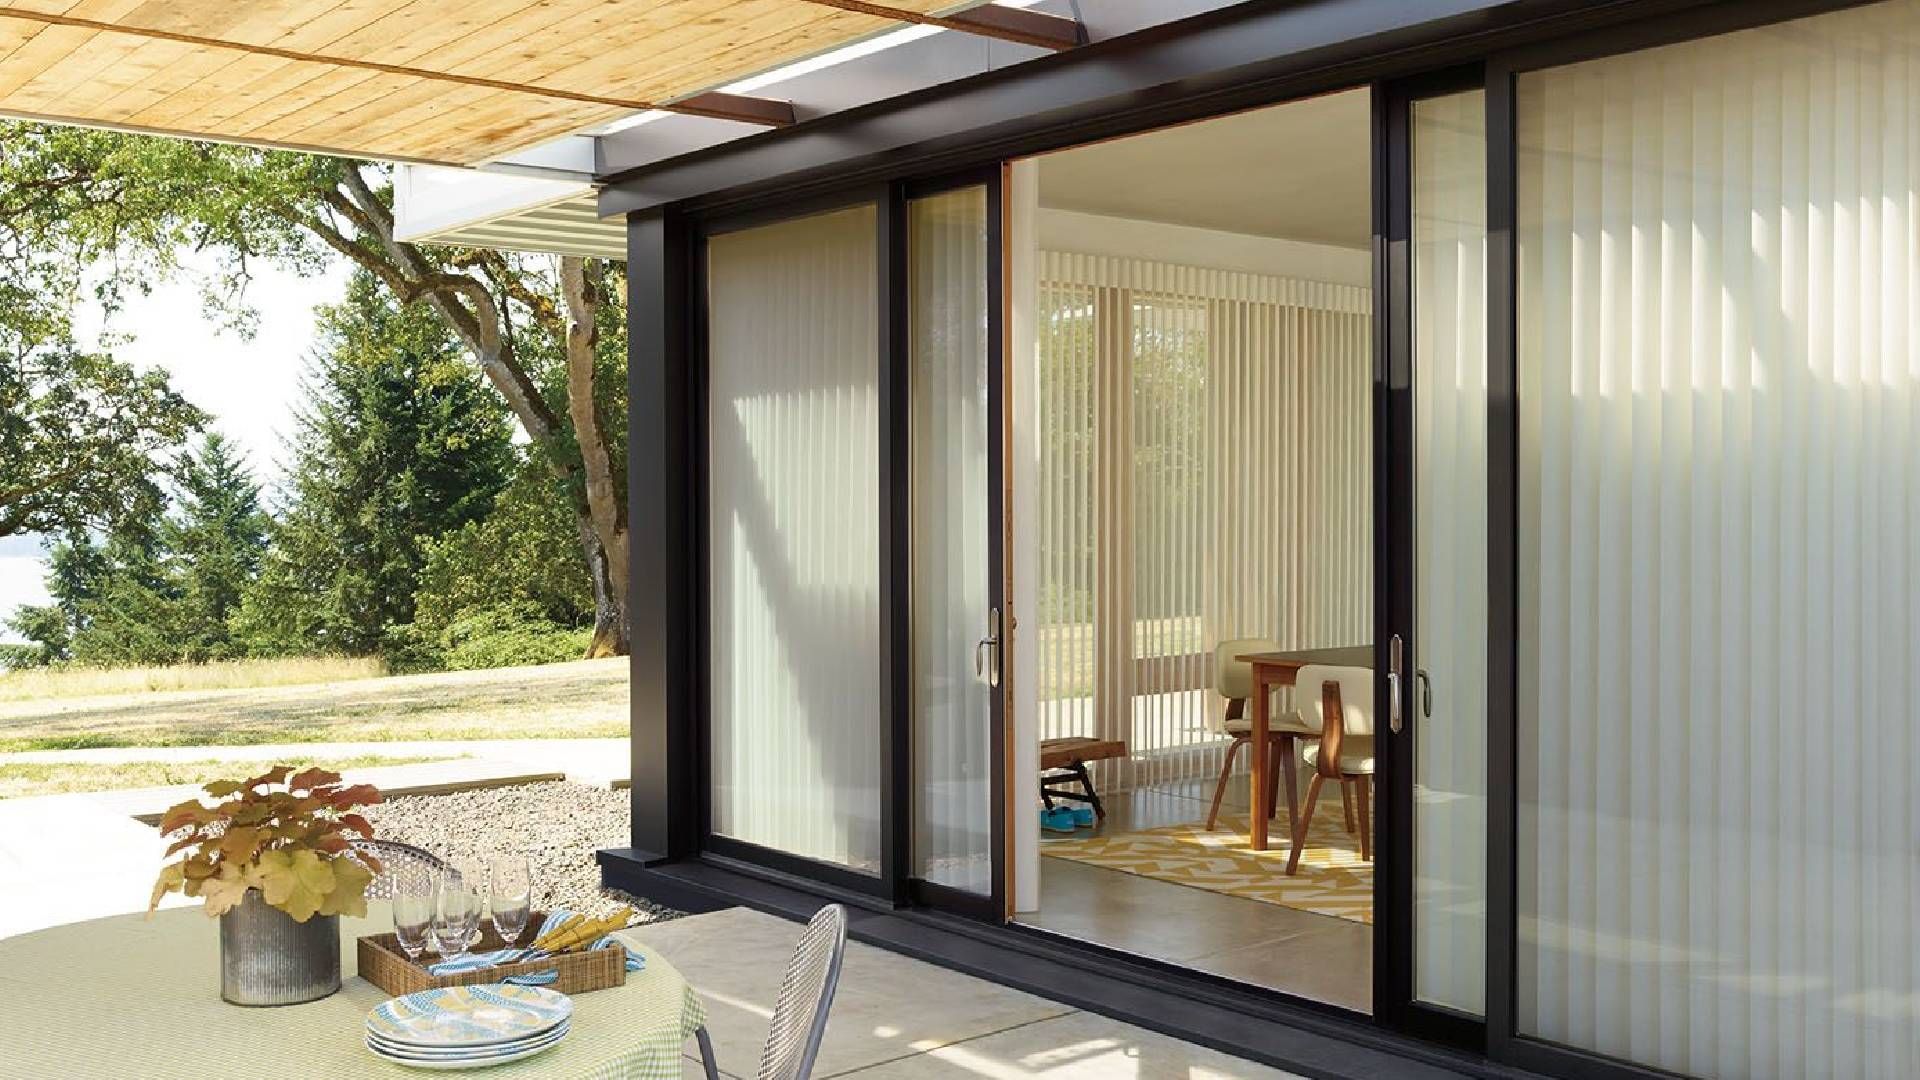 Sliding glass patio doors leading to an outdoor patio dressed with Hunter Douglas Luminette® Sheer P